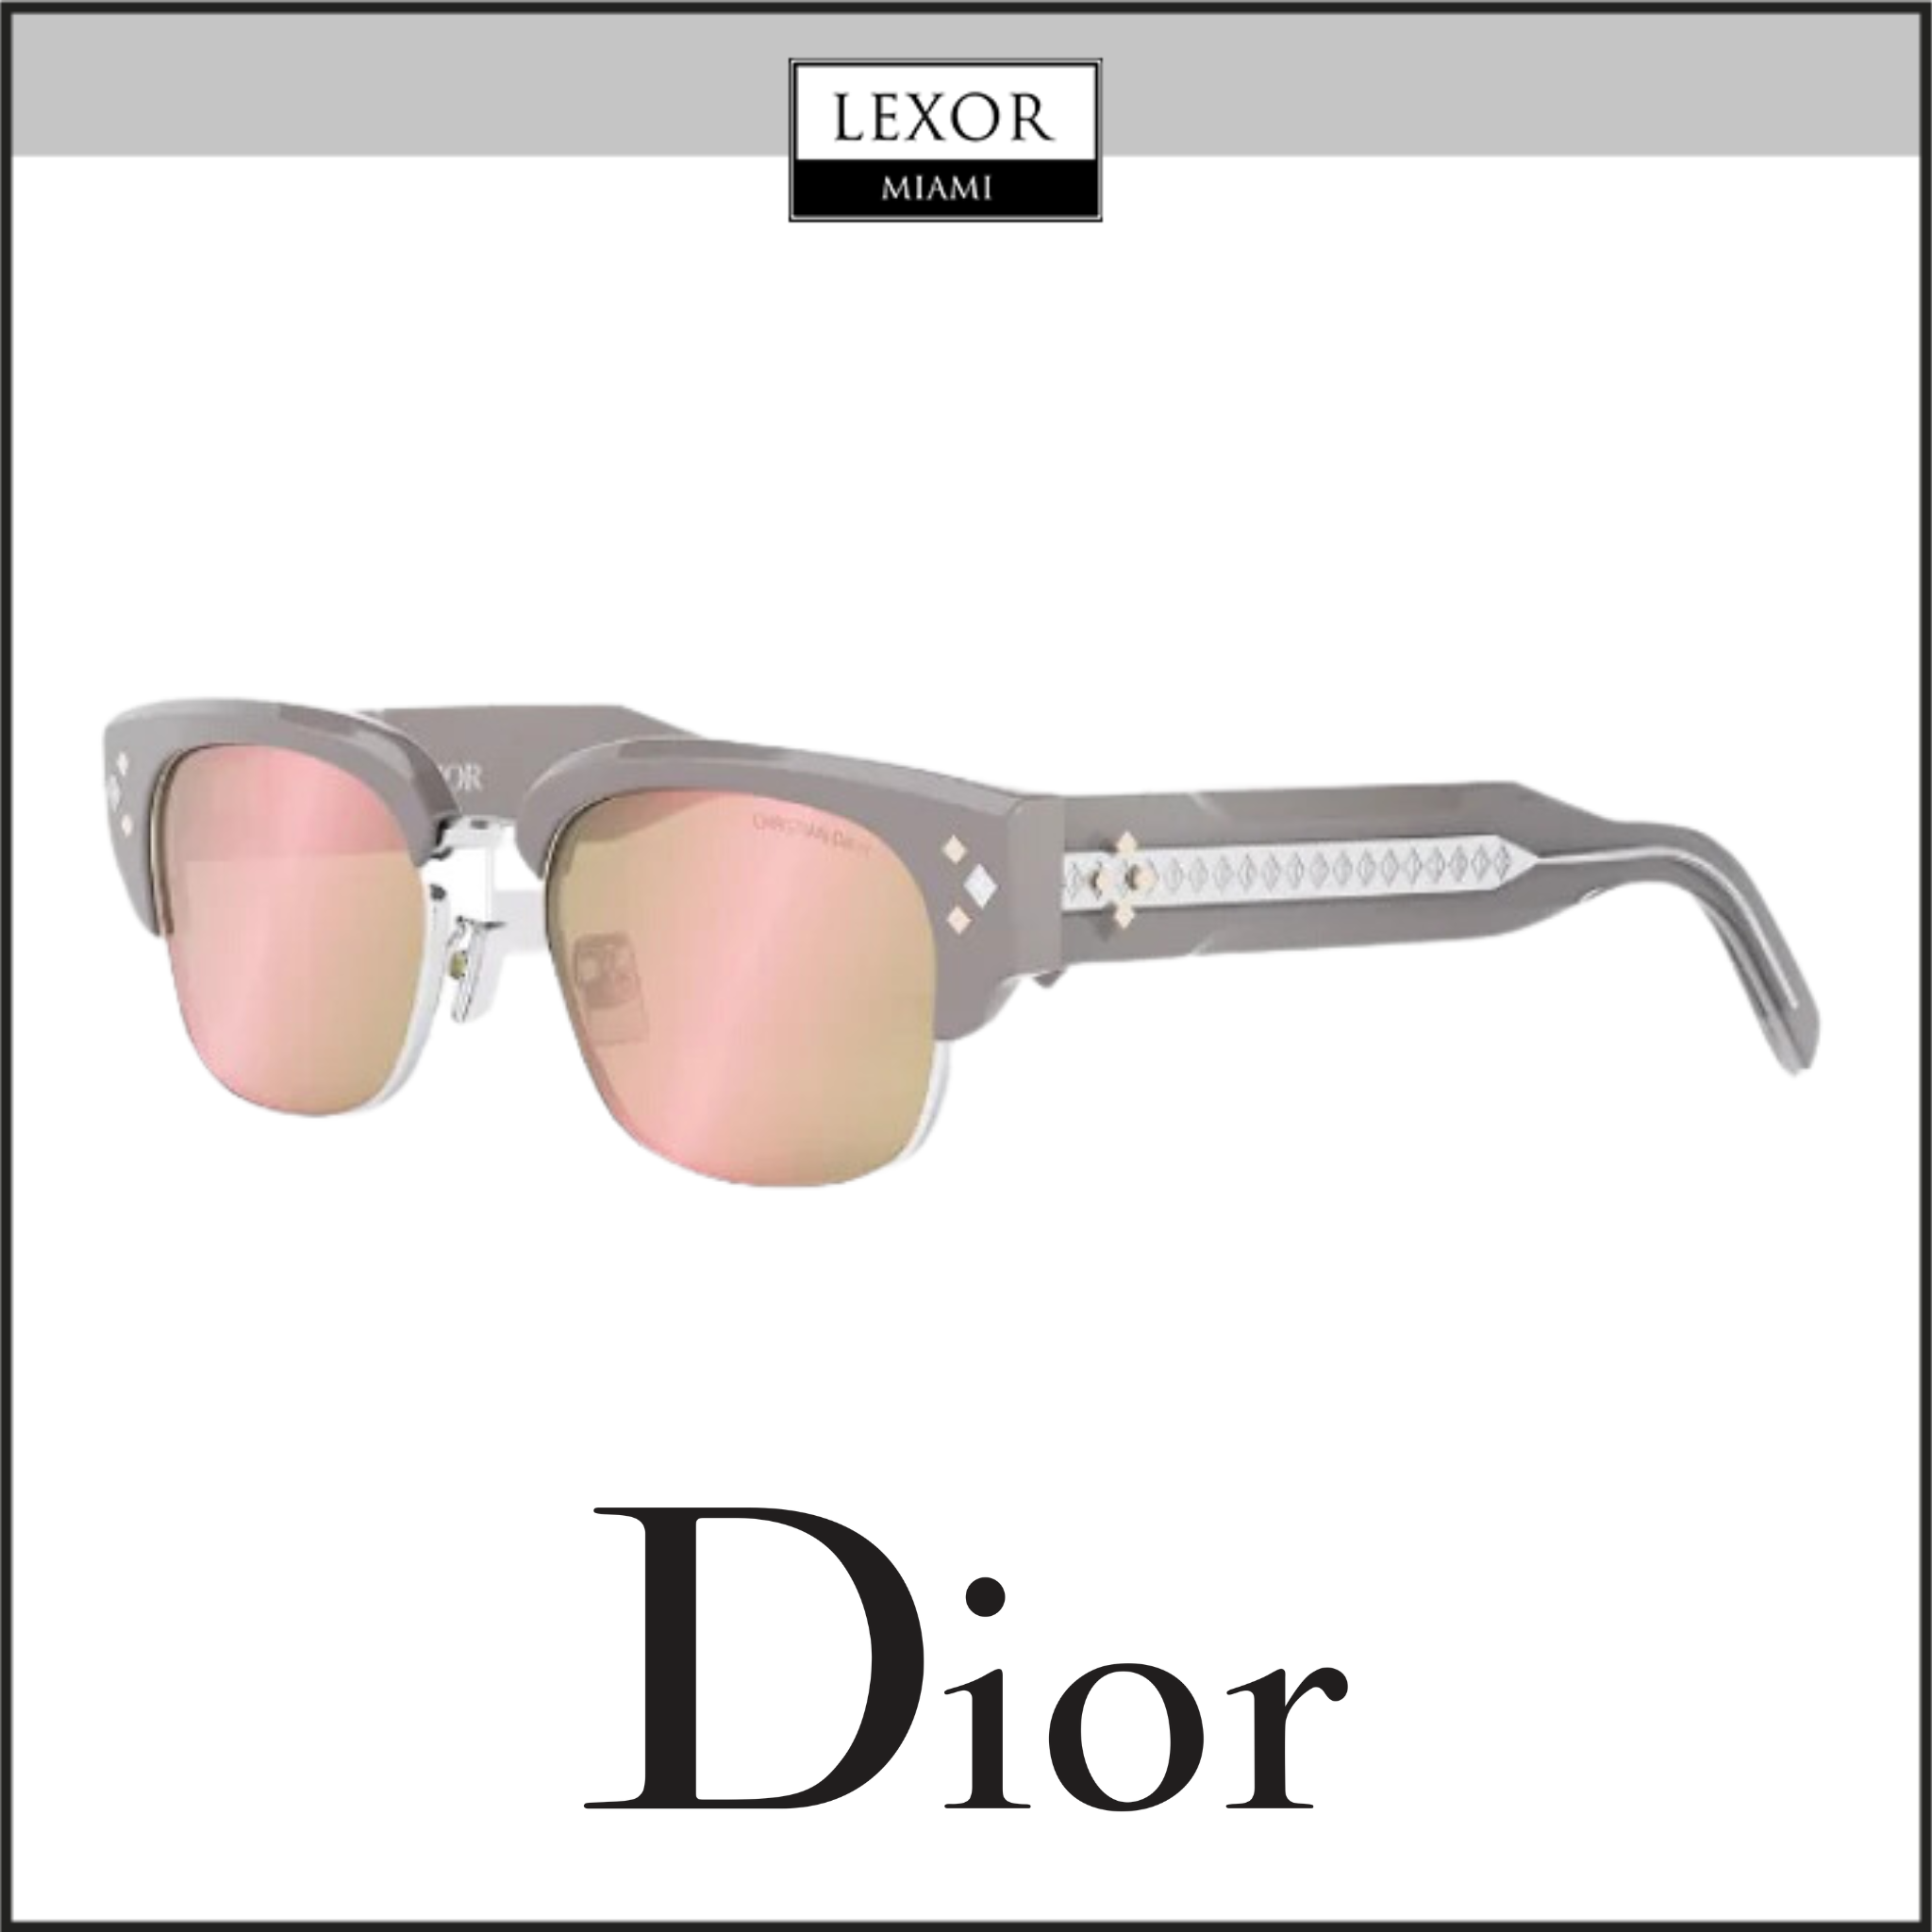 Dior Diamond of The Maison 55mm Browline Sunglasses in Beige/Other /Brown Mirror